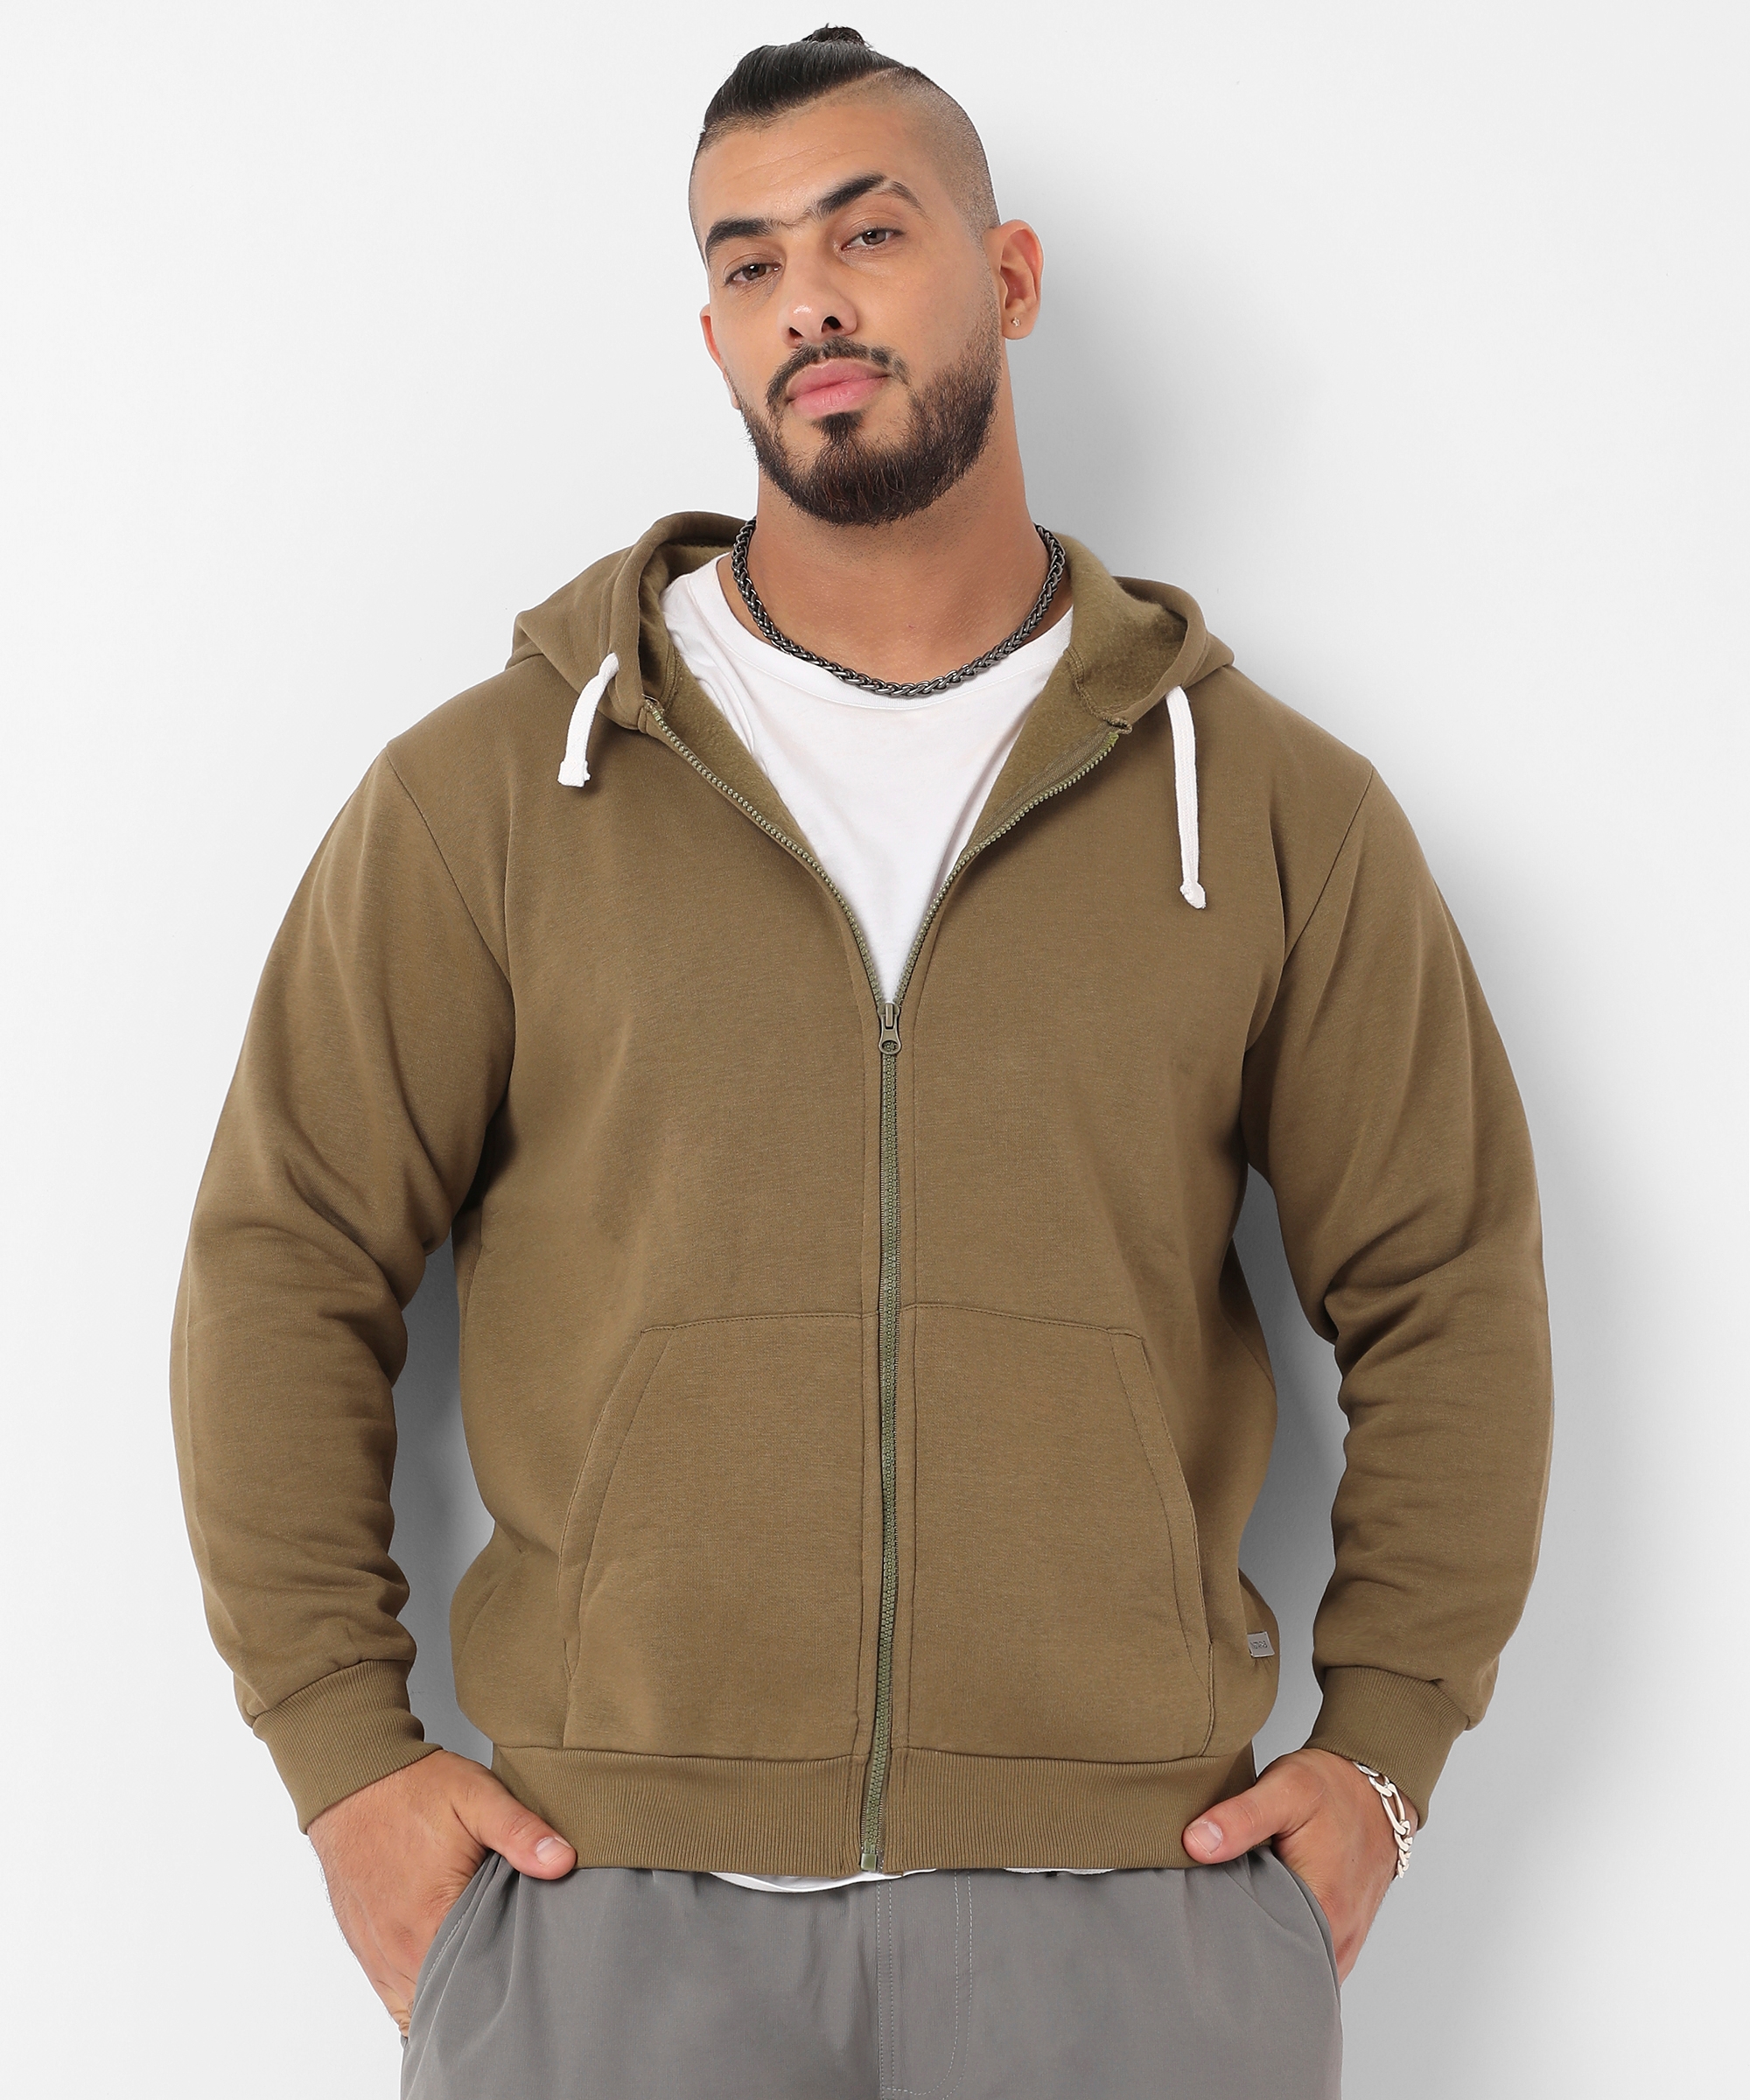 Instafab Plus | Men's Olive Green Zip-Front Hoodie With Contrast Drawstring